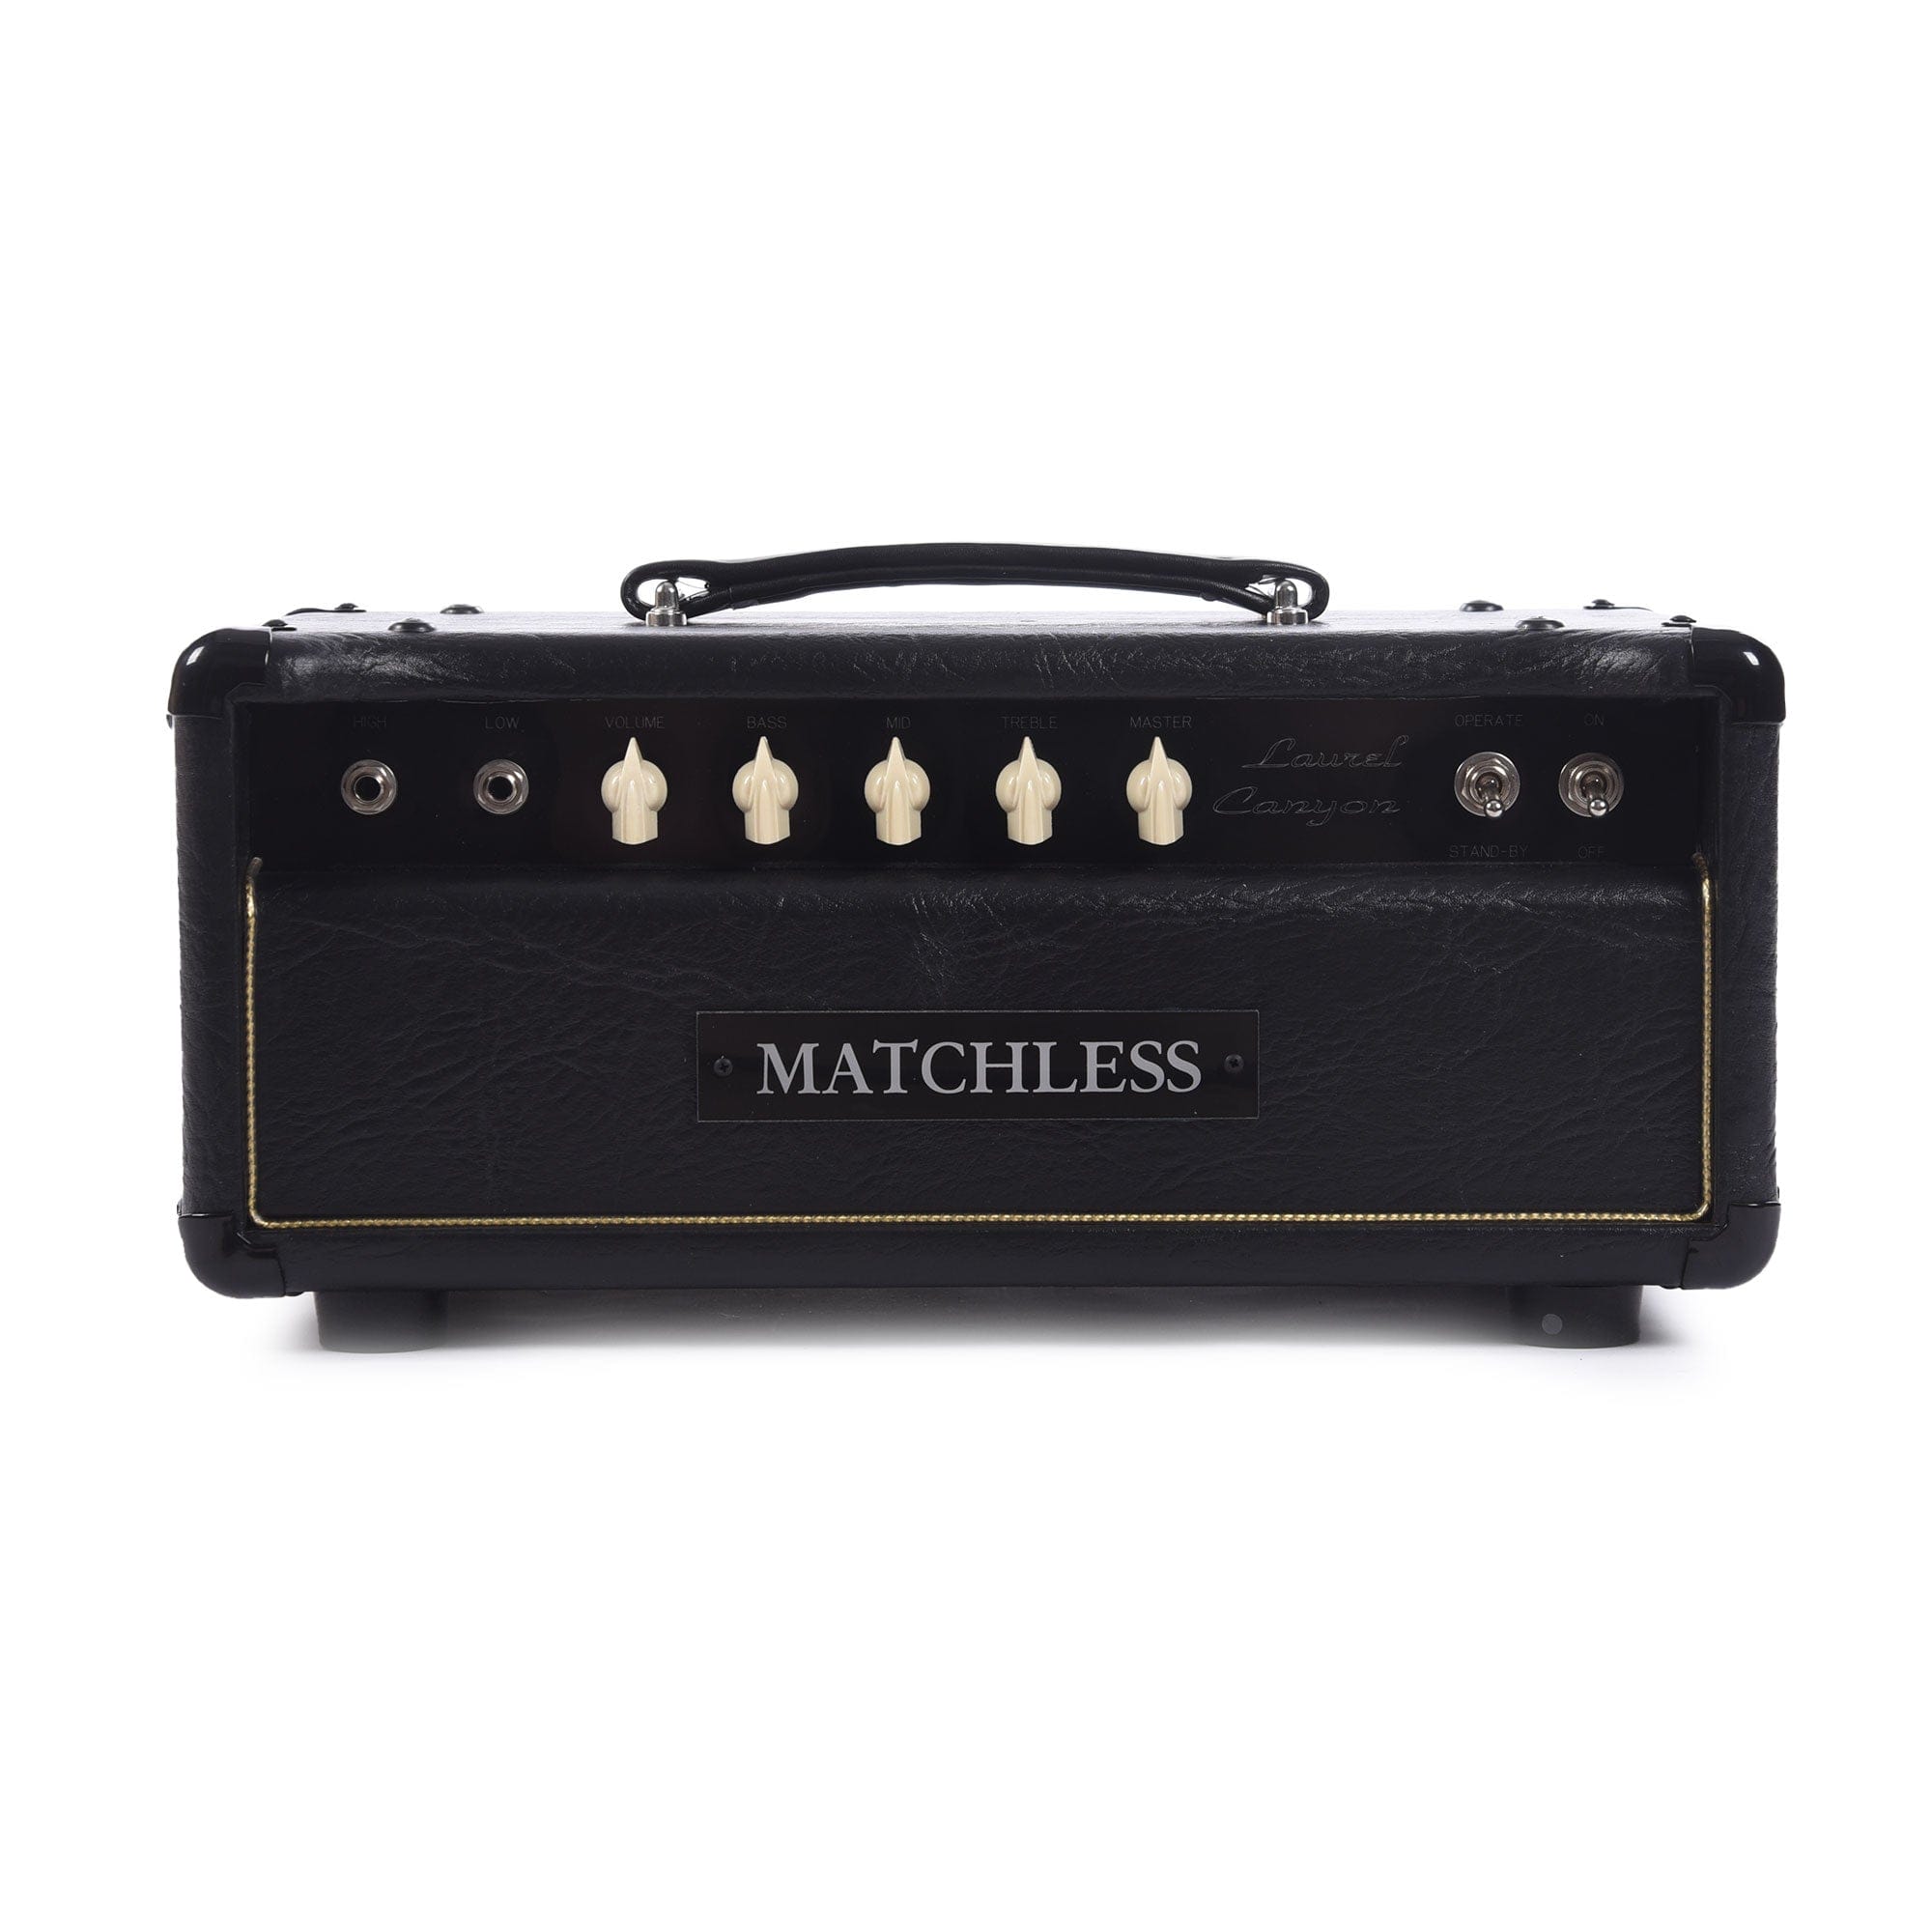 Matchless Laurel Canyon 20W Head Black w/ Gold Grill Amps / Guitar Heads